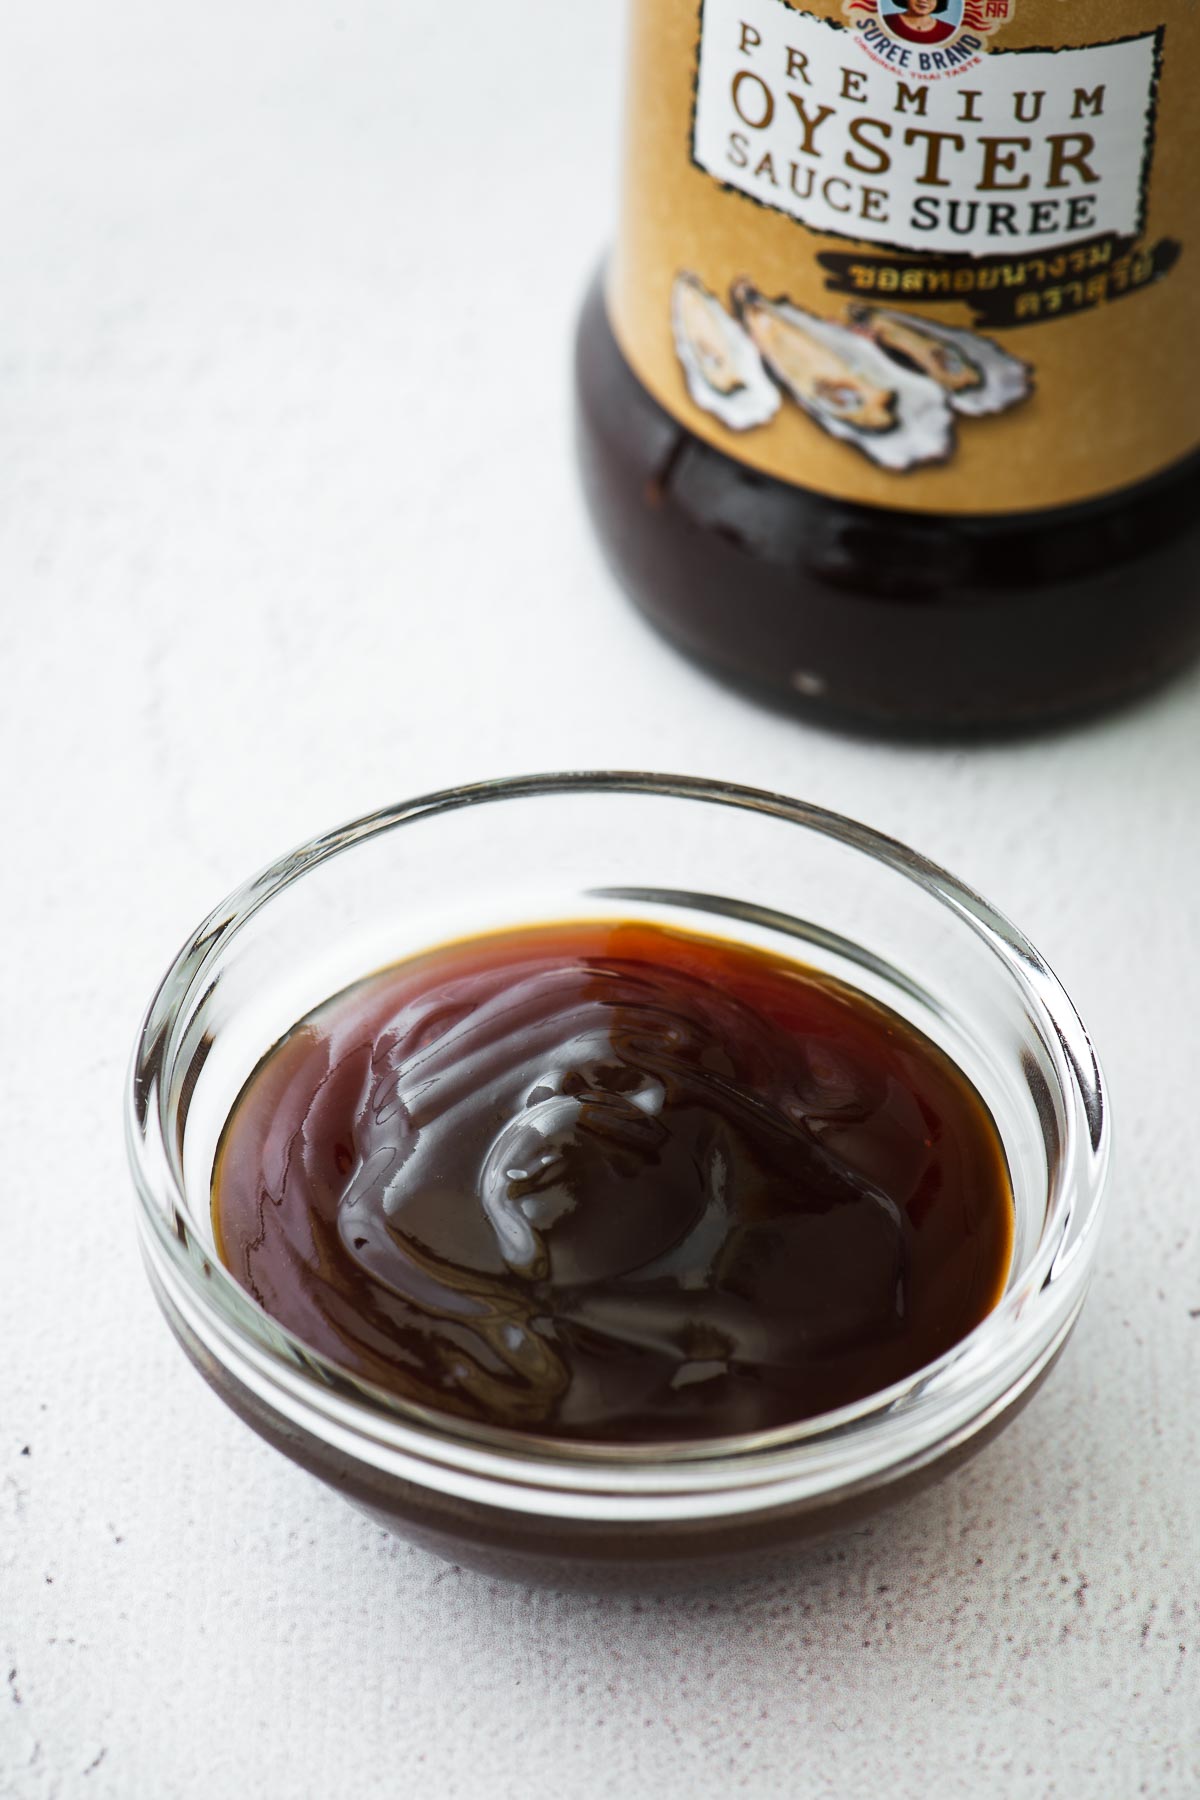 Oyster sauce in a small glass bowl with an oyster sauce bottle in the background.